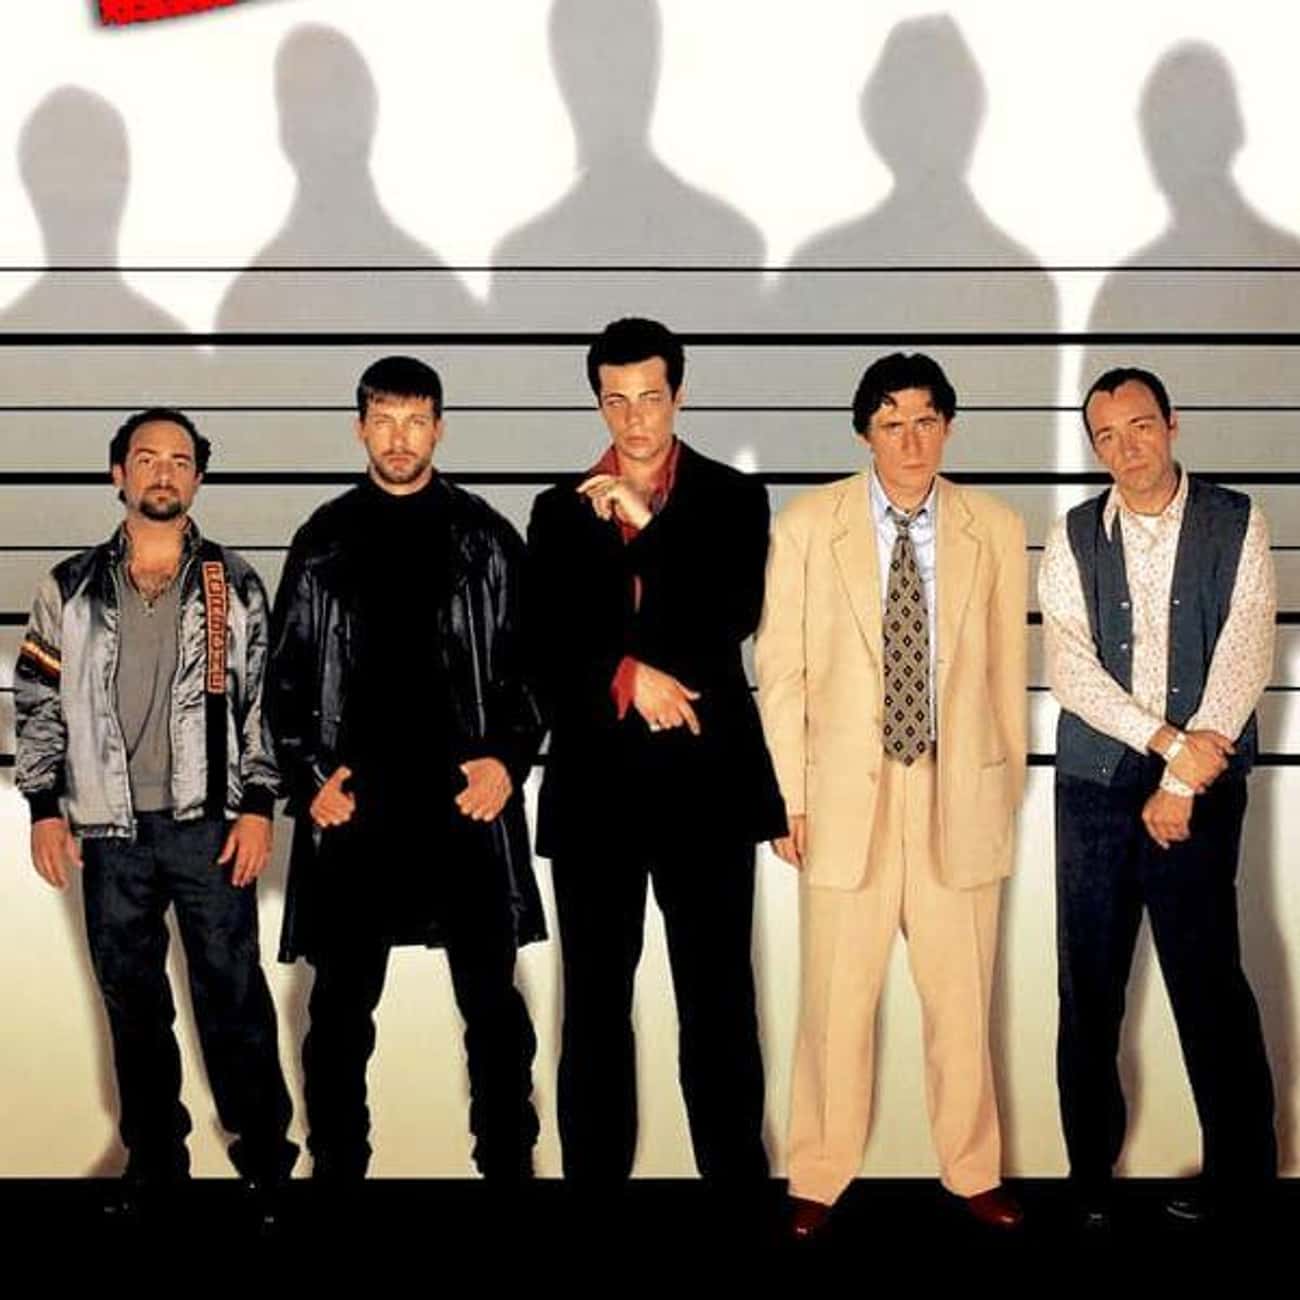 The Usual Suspects